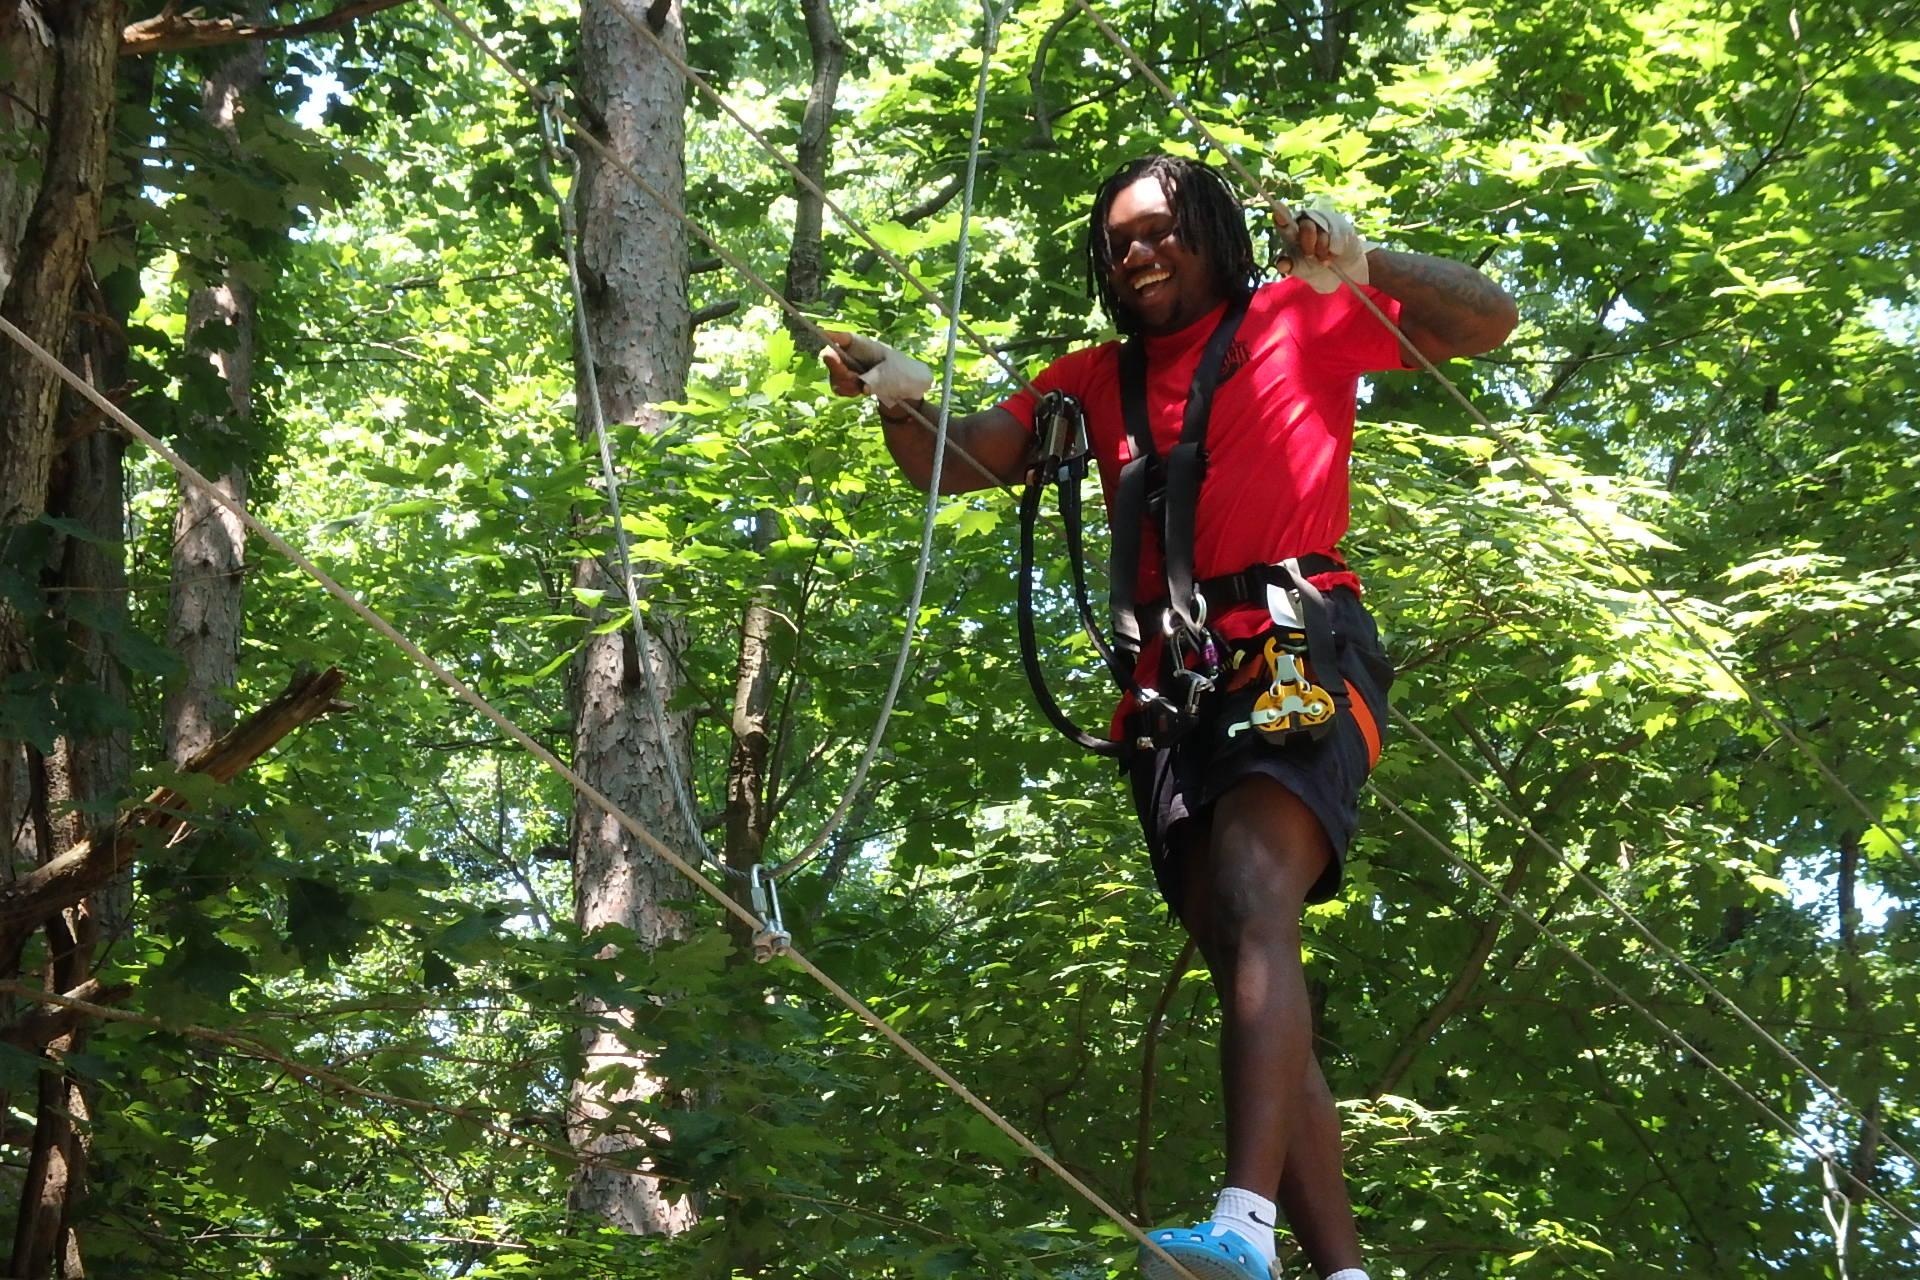 The thrill of Zip Lining is only part of the challenge at ZipZone Outdoor Adventures. Walking  a cable adds to the breathtaking experience!